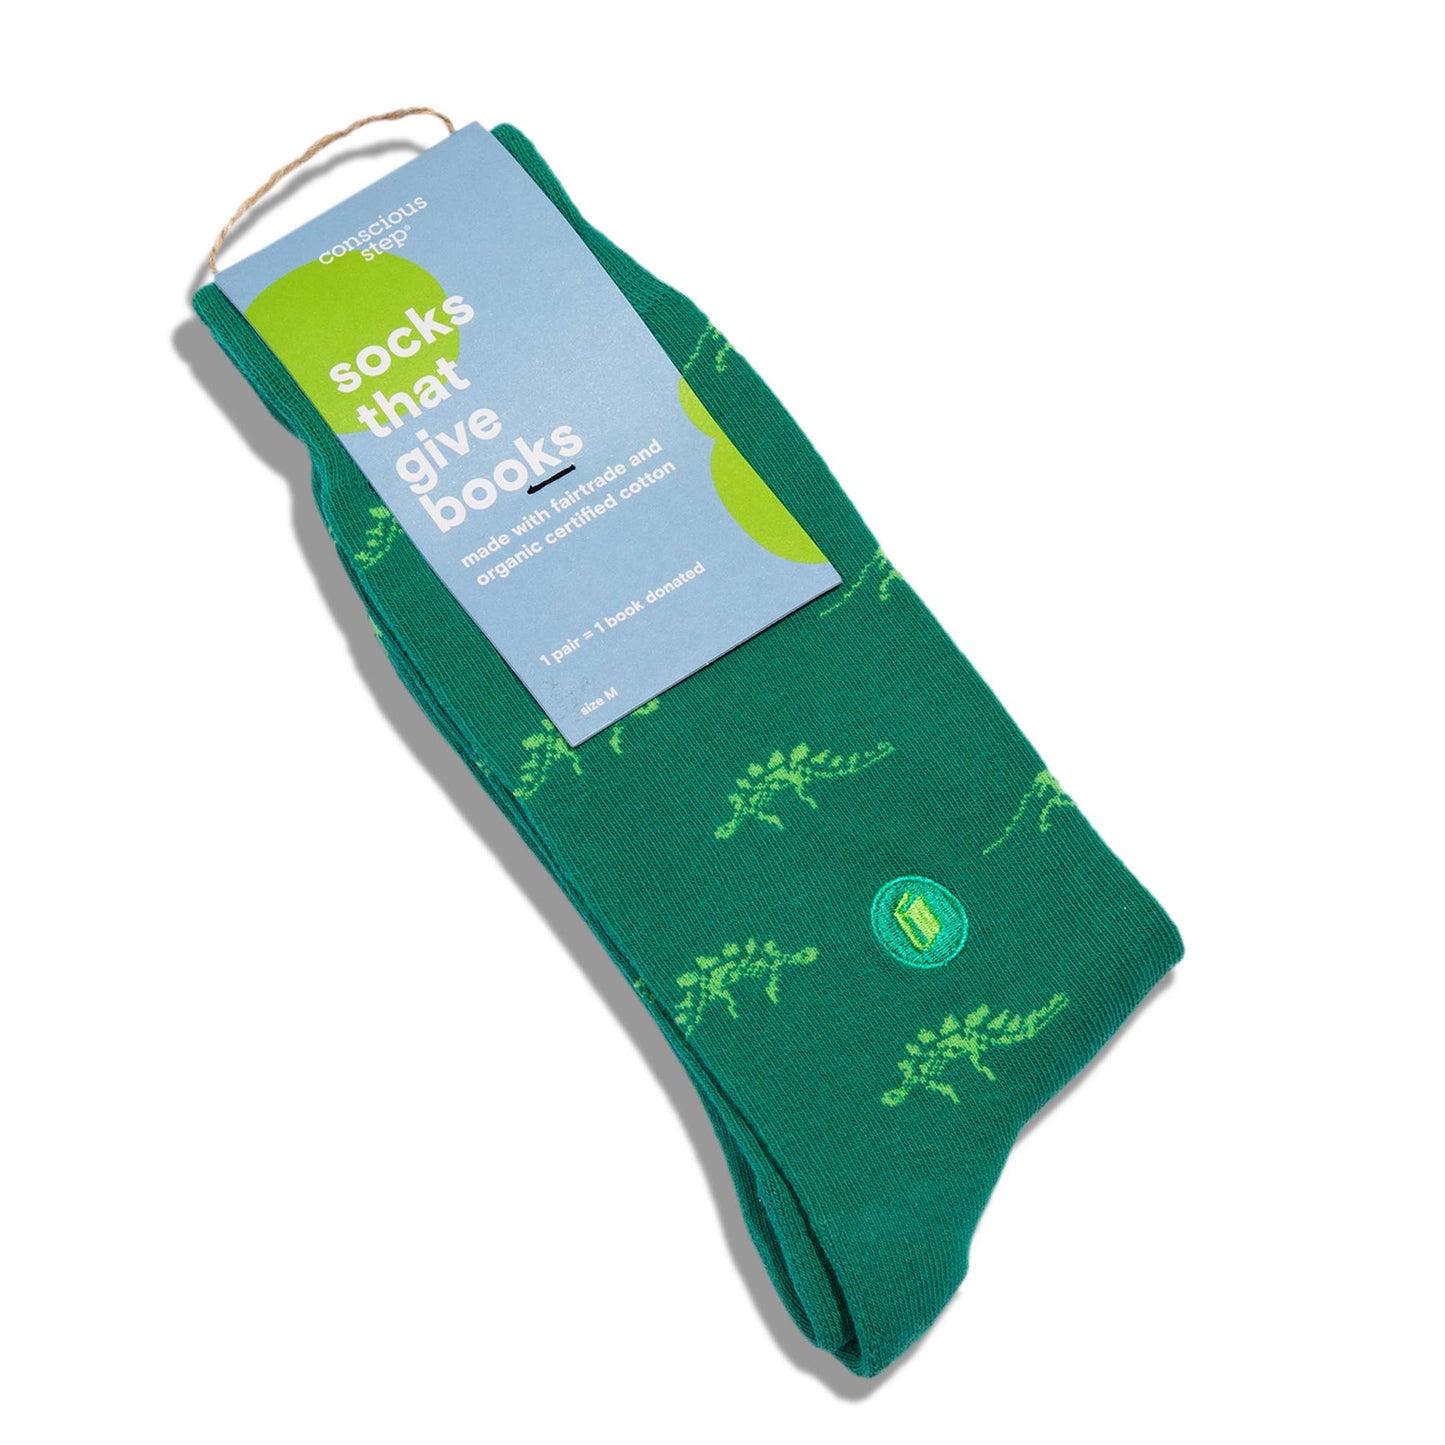 Conscious Step - Socks that Give Books  (Green Dinosaurs)  Conscious Step Medium  -better made easy-eco-friendly-sustainable-gifting